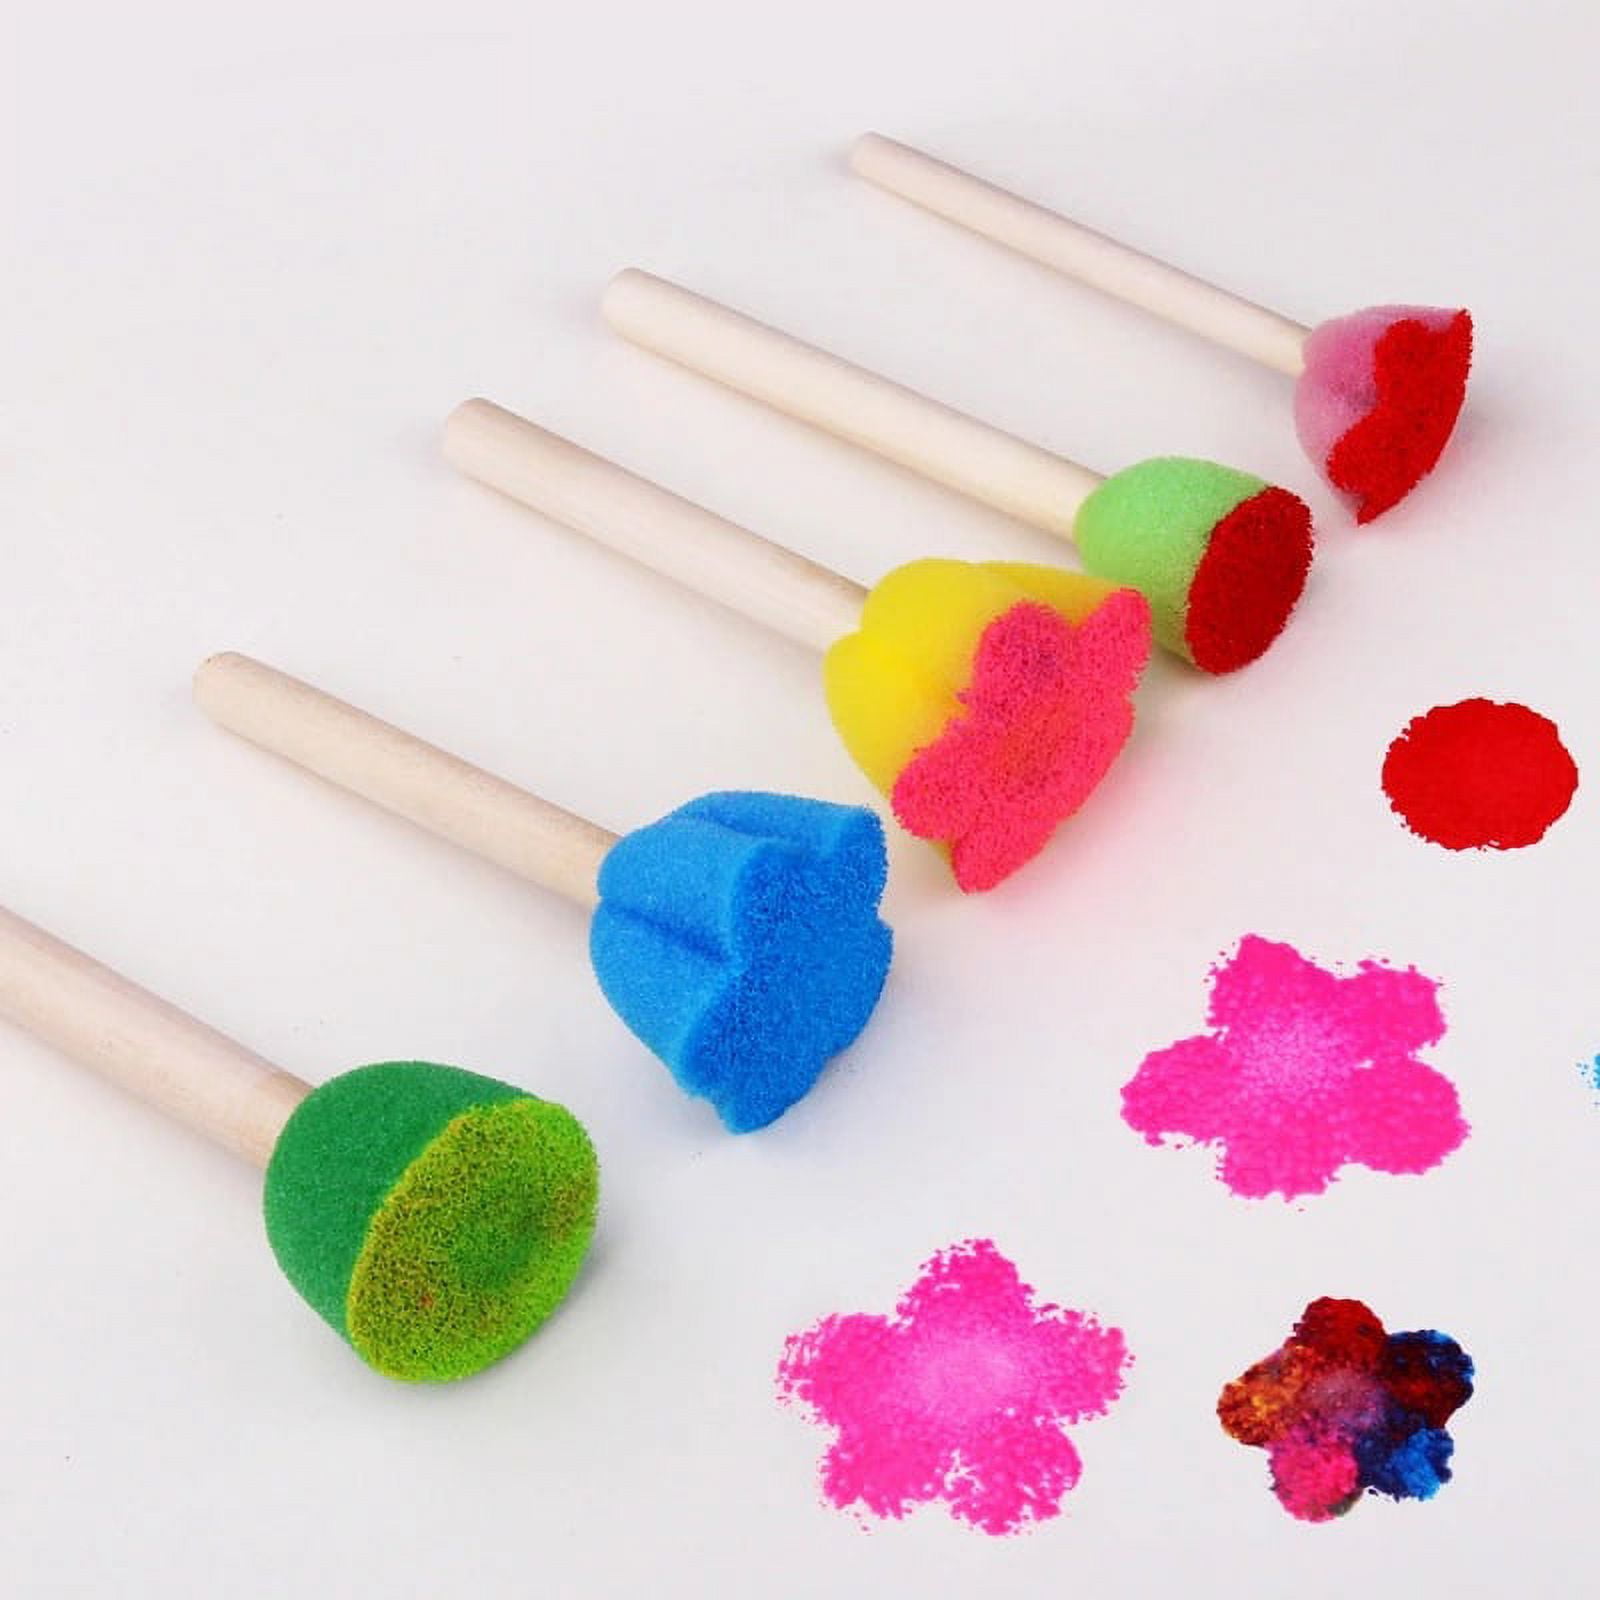 Glokers Early Learning Kids Paint Set, 30 Piece Mini Flower Sponge Paint Brushes. Assorted Painting Drawing Tools in A Clear Durable Storage Pouch.